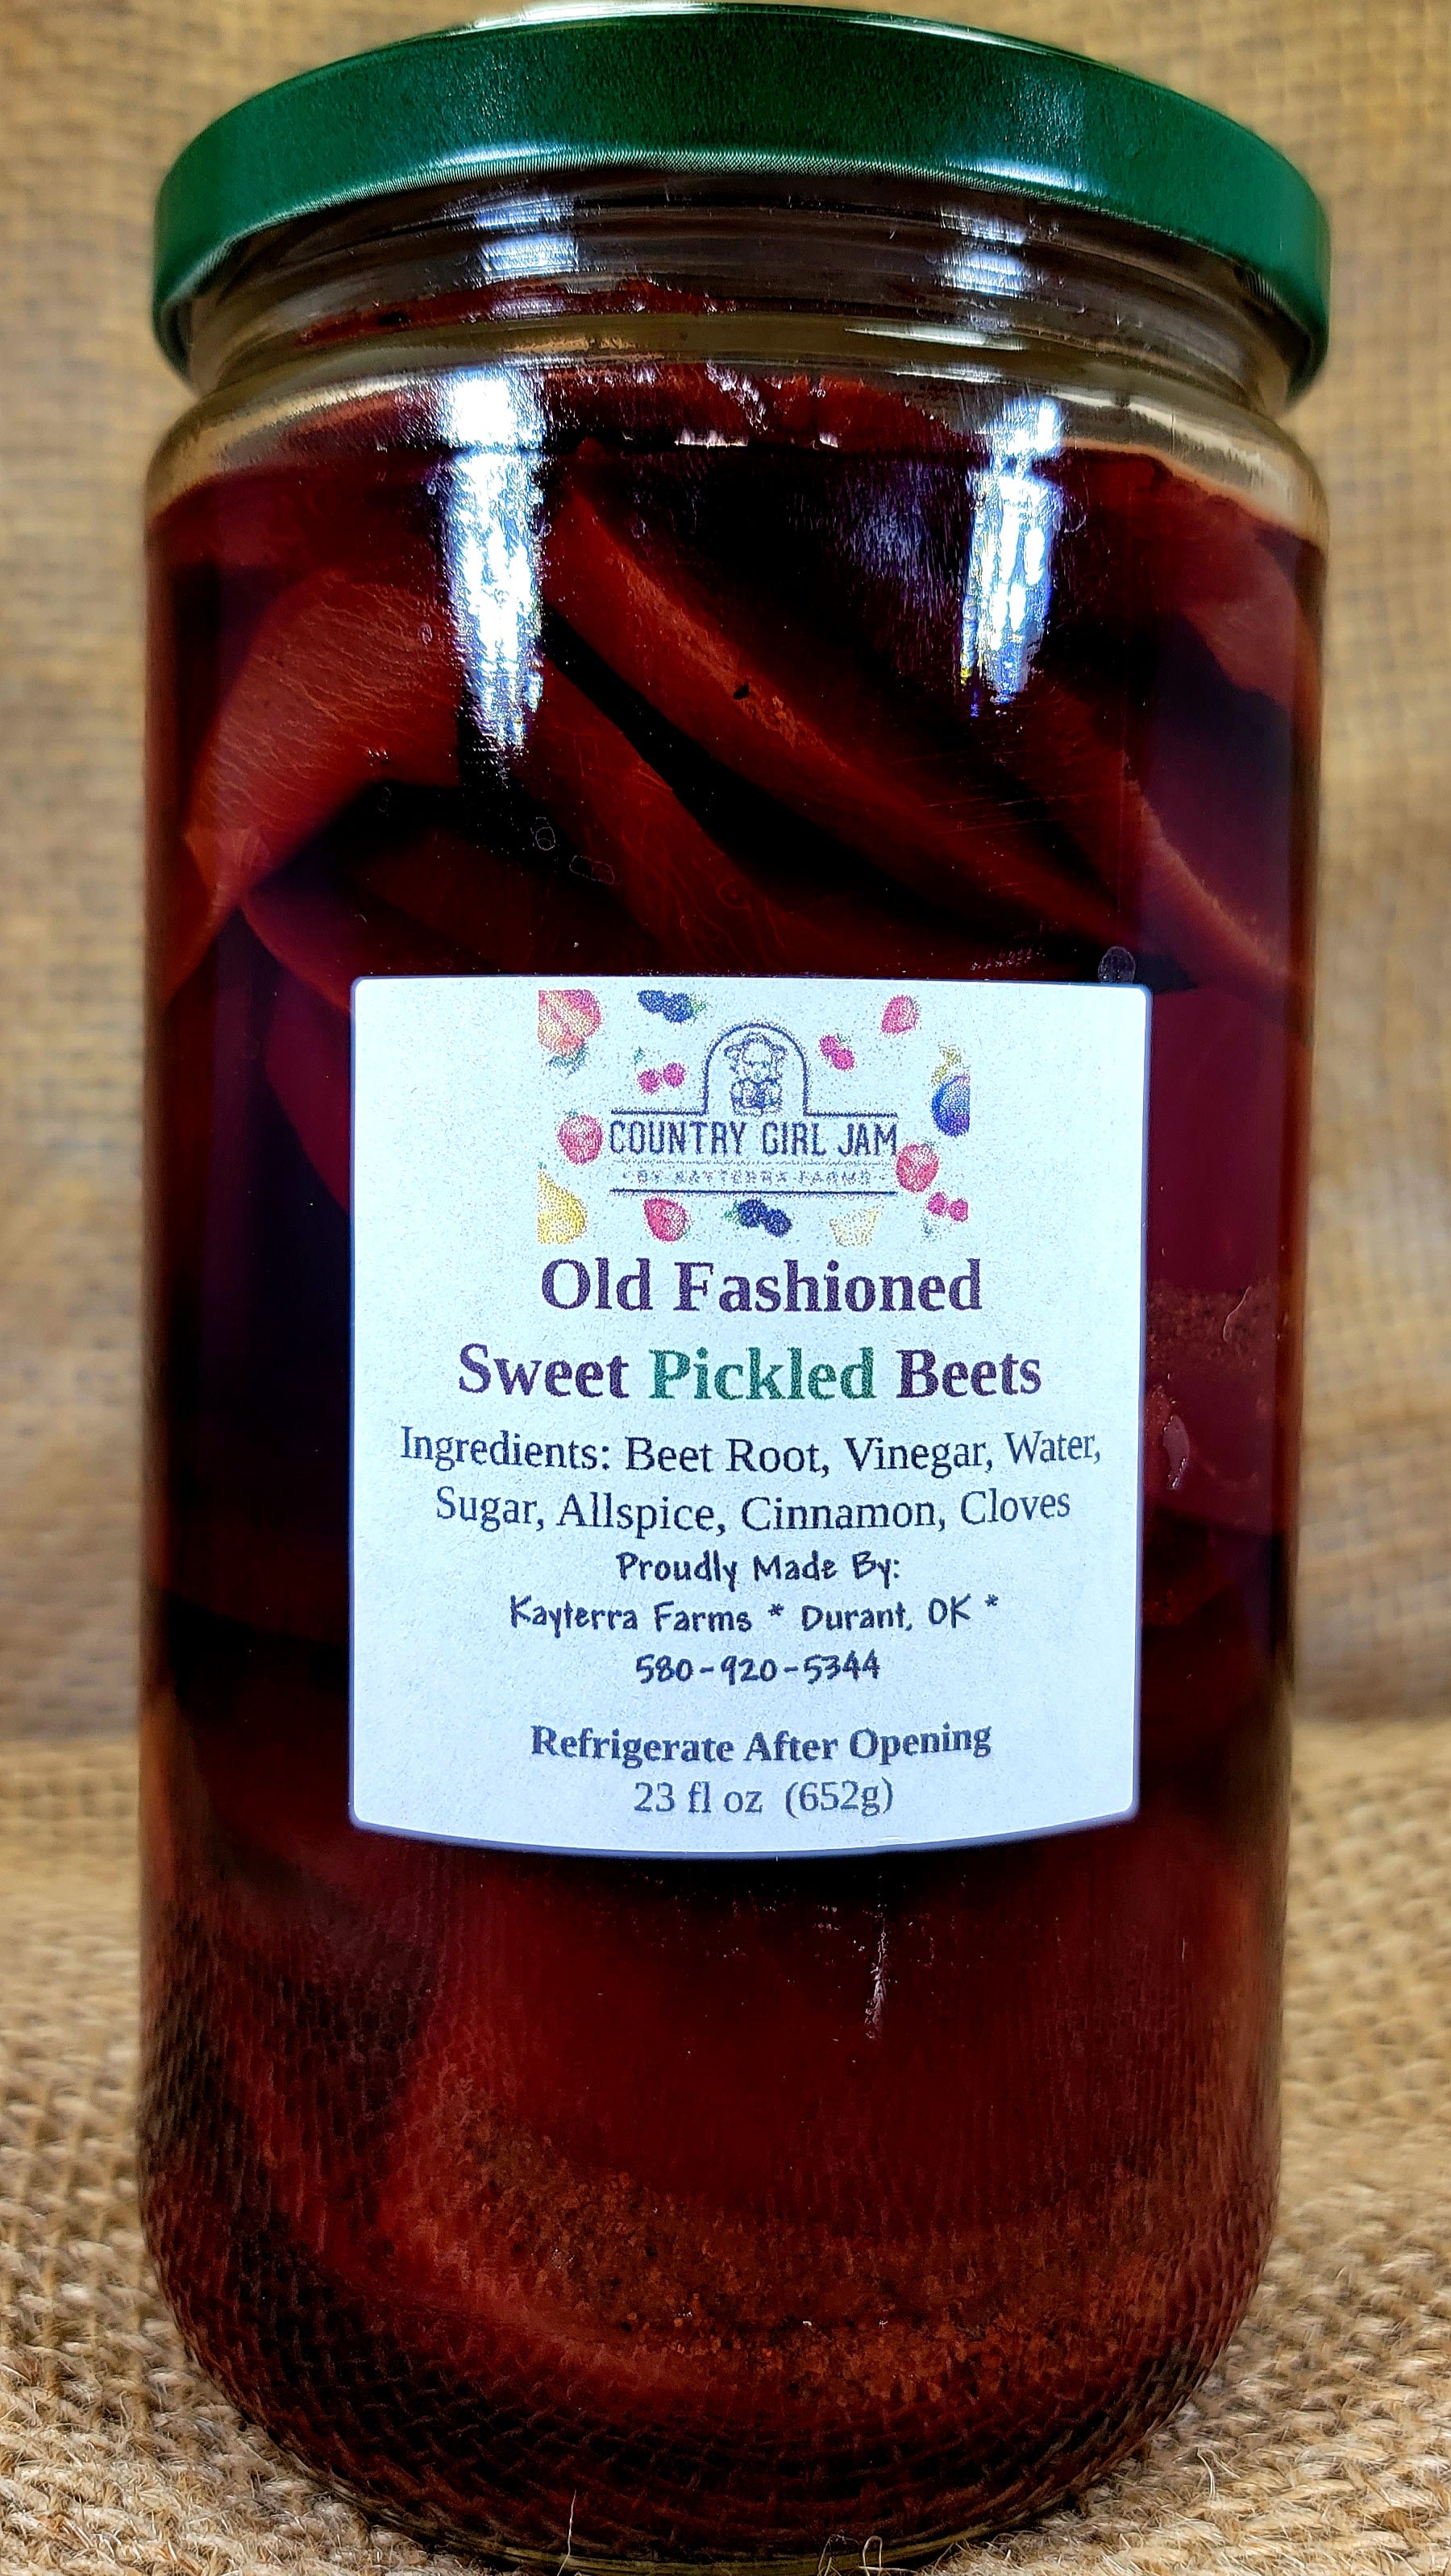 Old Fashioned Sweet Pickled Beets New Size 16oz only